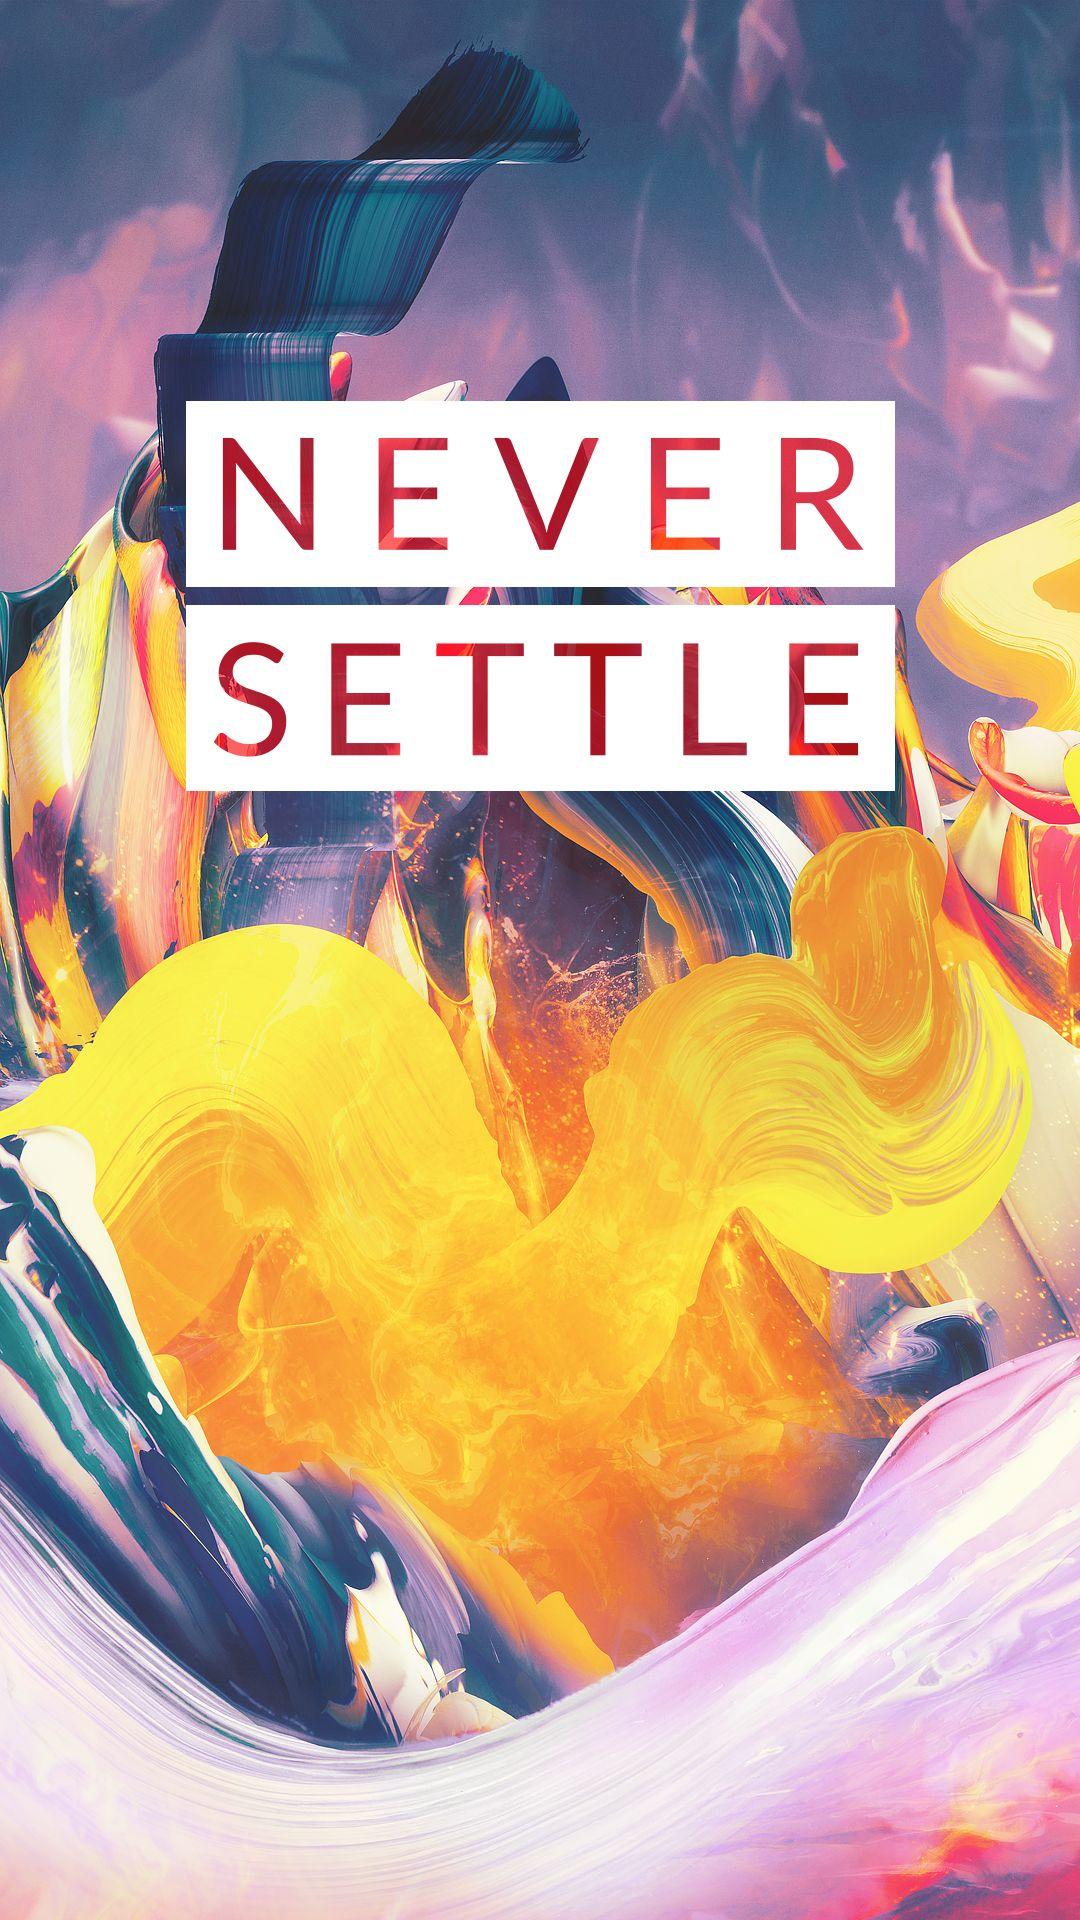 Download OnePlus 3T Official Stock Wallpaper